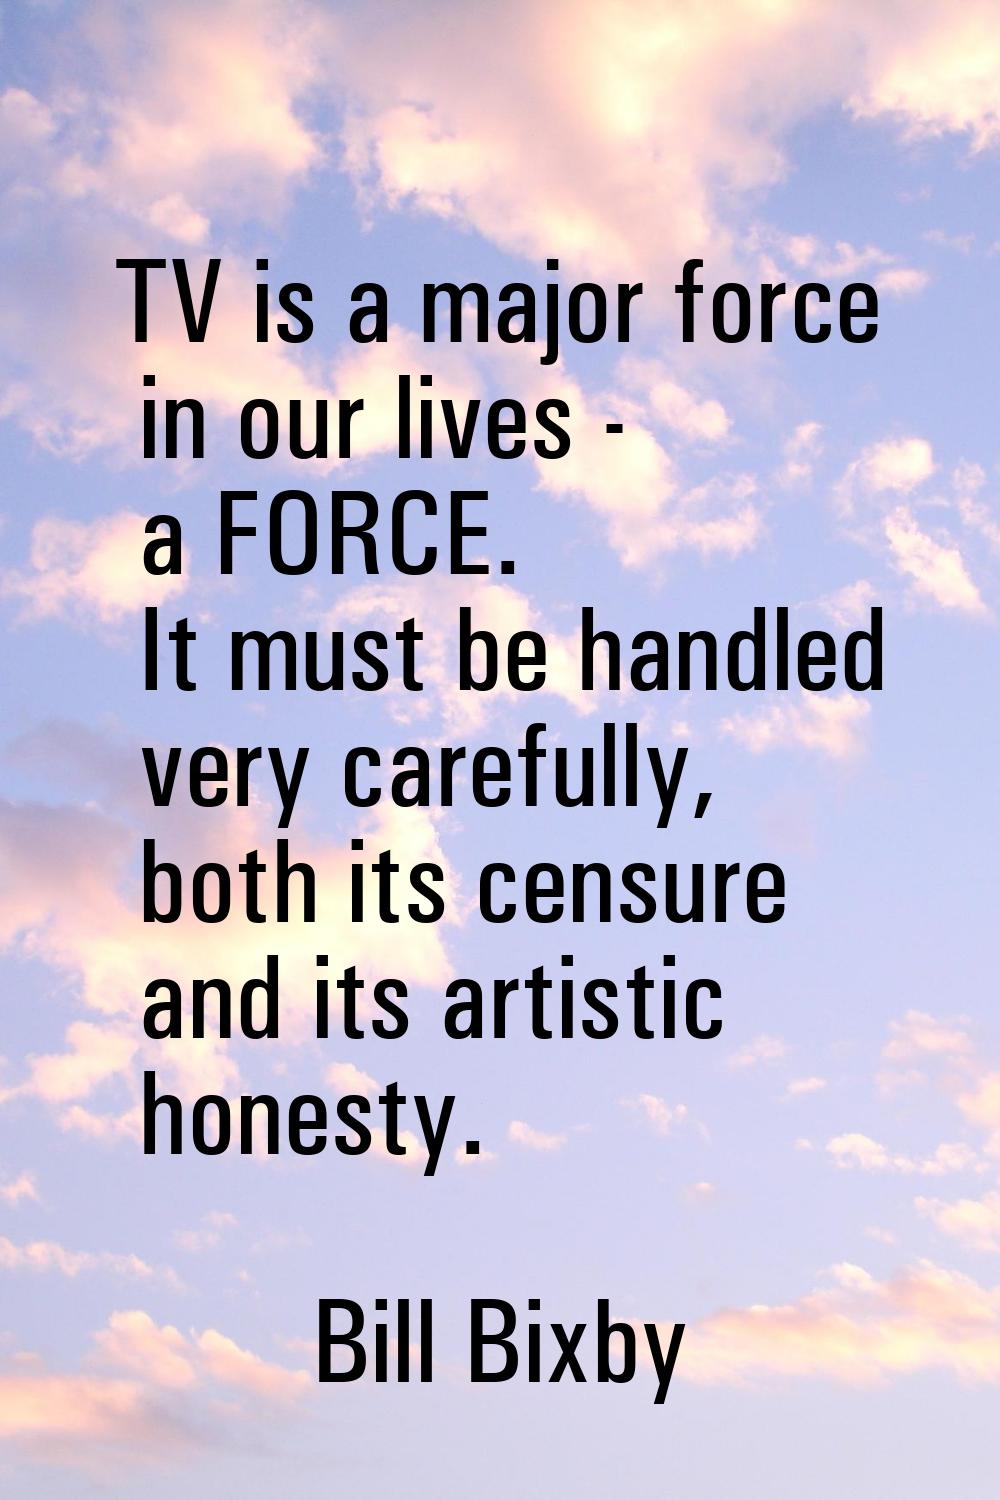 TV is a major force in our lives - a FORCE. It must be handled very carefully, both its censure and